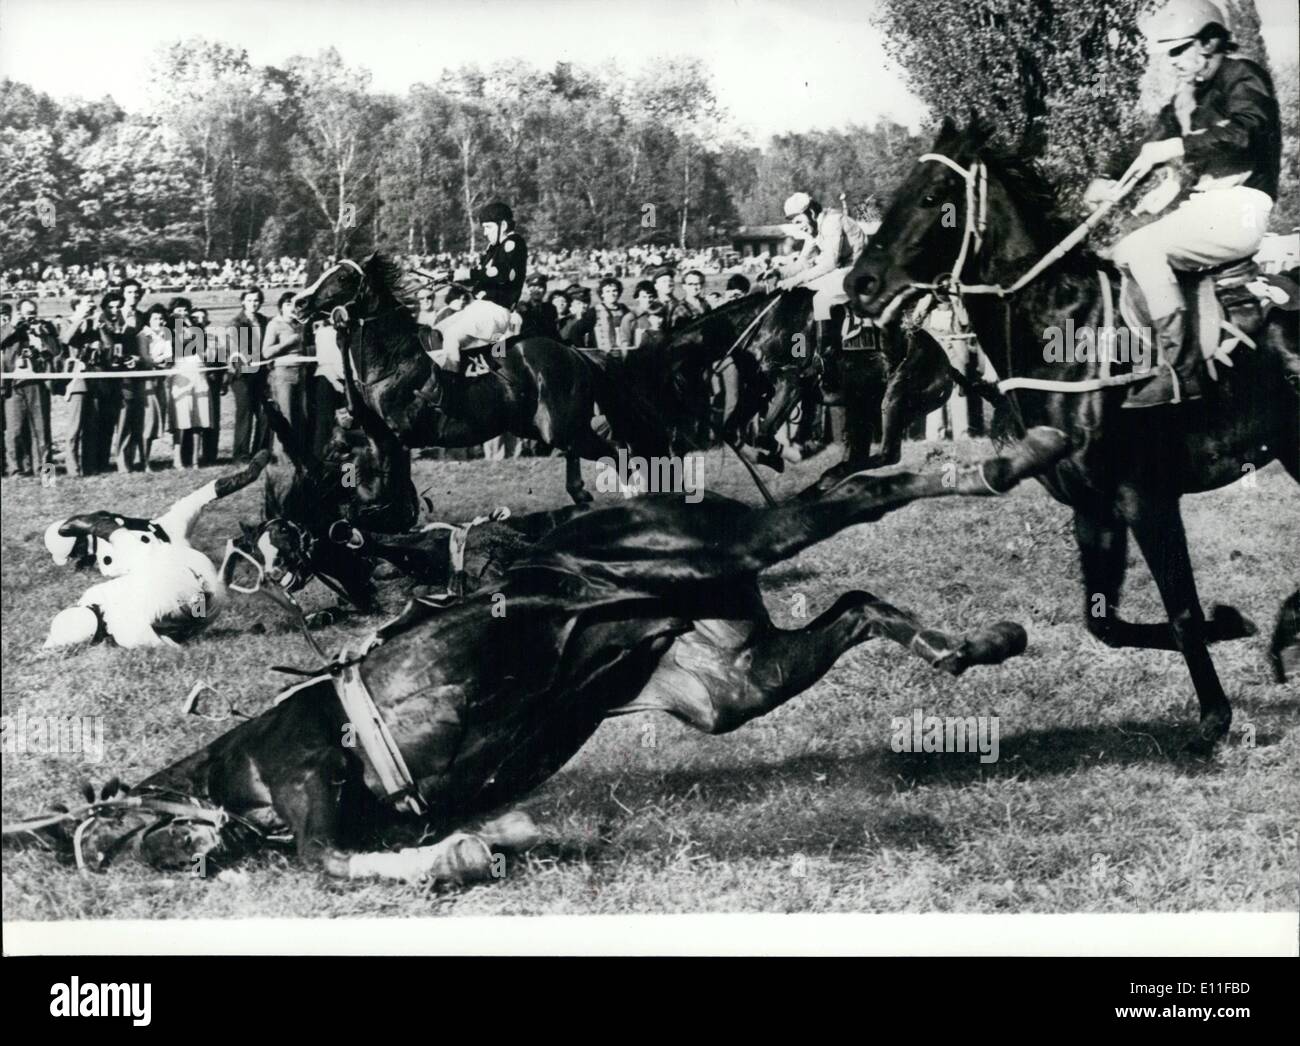 Oct. 10, 1977 - The Grand Pardubice: The oldest and most difficult Steeple Chase on the continent of Europe, The grand Pardubice, was won by the Czech Jockey Vaclar Chaloupka riding Vaclav, this is the fourth time he has won the race. Photo Shows Horse and riders falling at the Taxis ditch most difficult fence in the Pardubice. Stock Photo